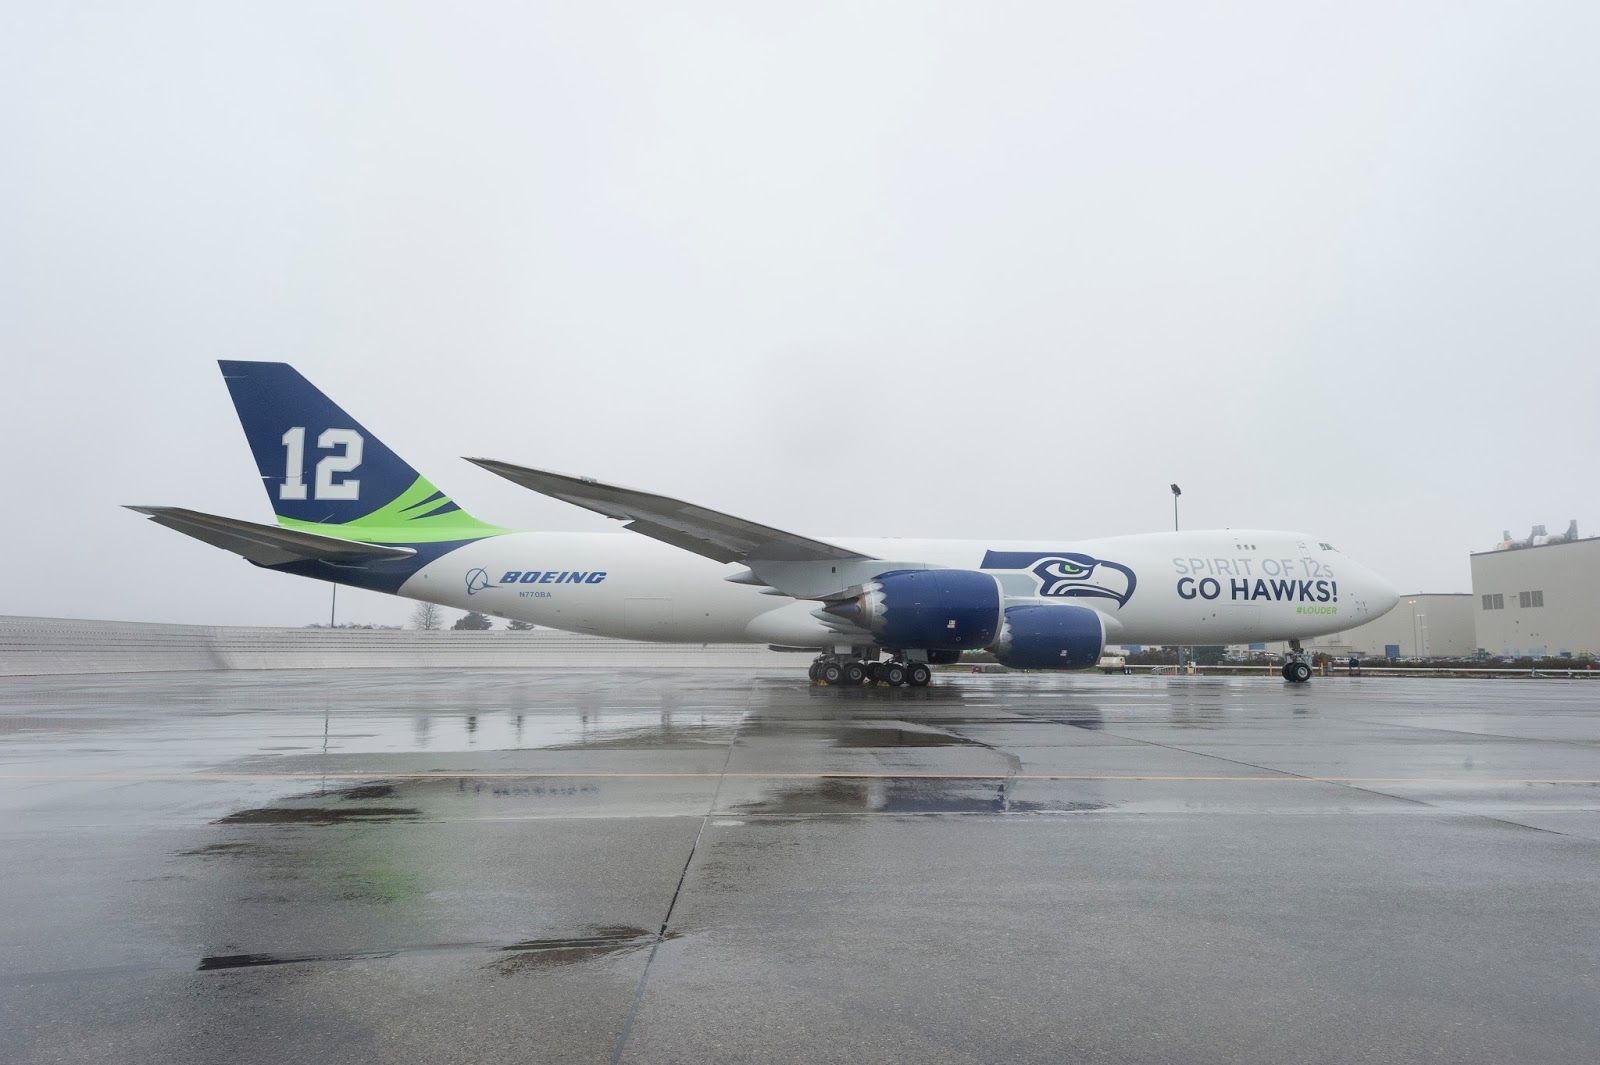 BOEING 747-8 (N770BA) - At Paine Field in Washington State at the unveiling of the Seattle Seahawks livery by Boeing. (Photo Courtesy of Boeing)